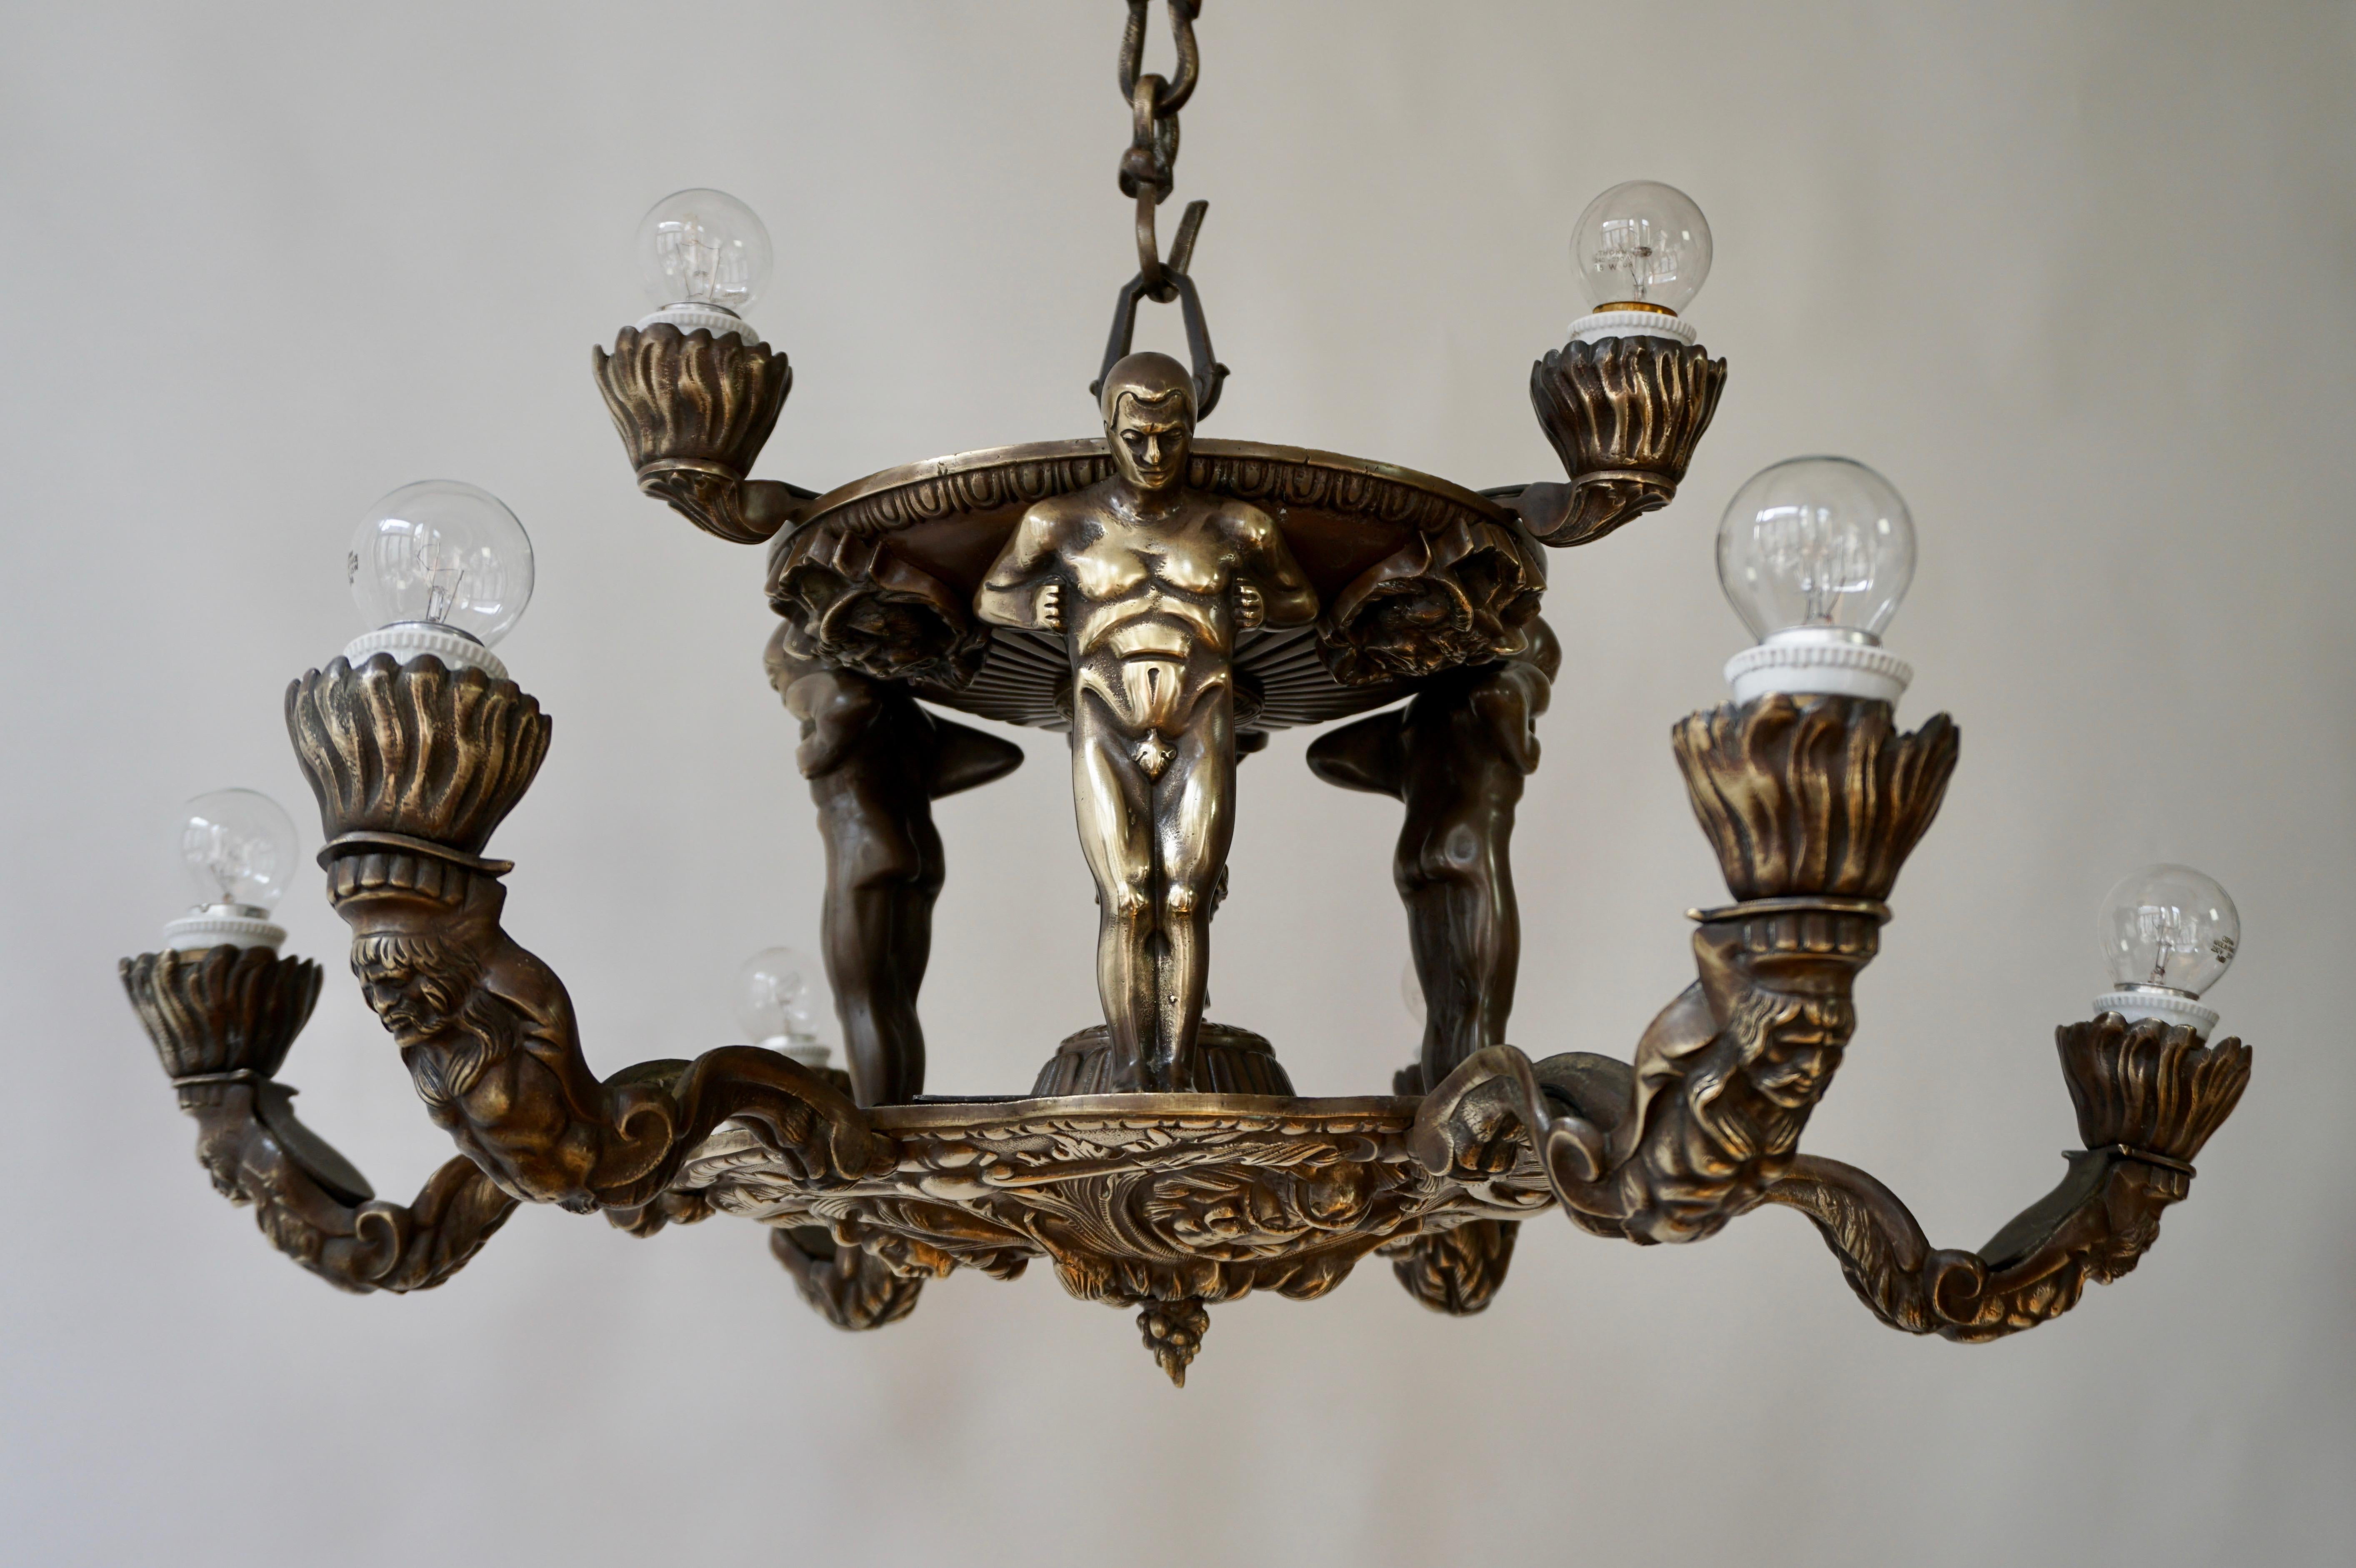 A remarkable two-tier bronze six-light French Hollywood Regency chandelier, the upper part inspired by Wiener Werkstätte Art Deco designs showing three male nude figures supporting a fountainlike structure, the lower part decorated with medallions